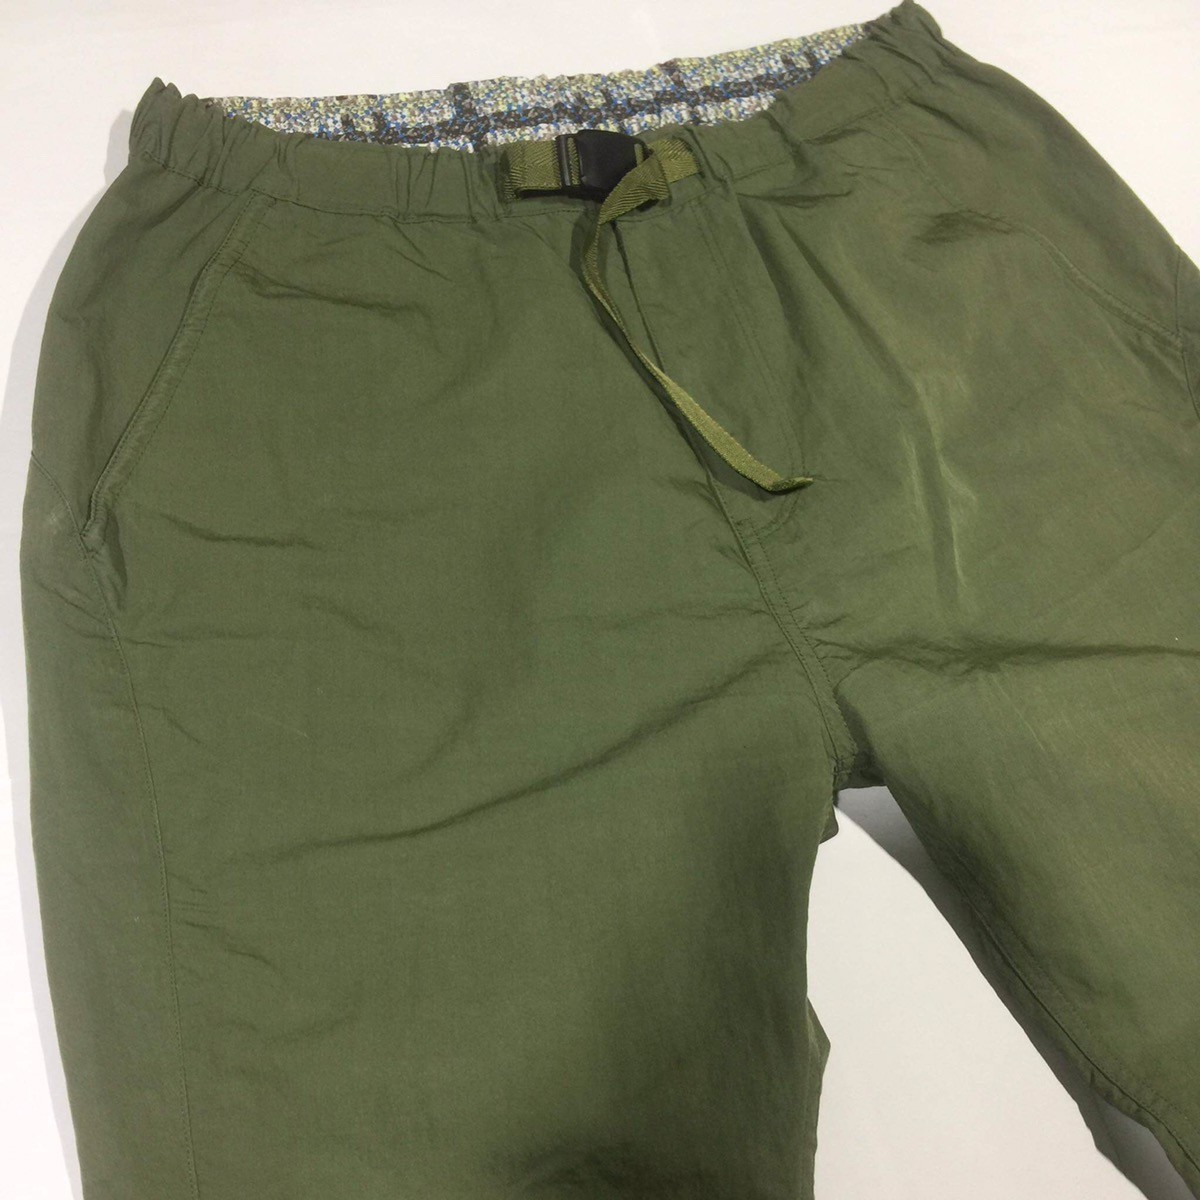 Coach Easy Pants Pique Typewriter Olive - 6